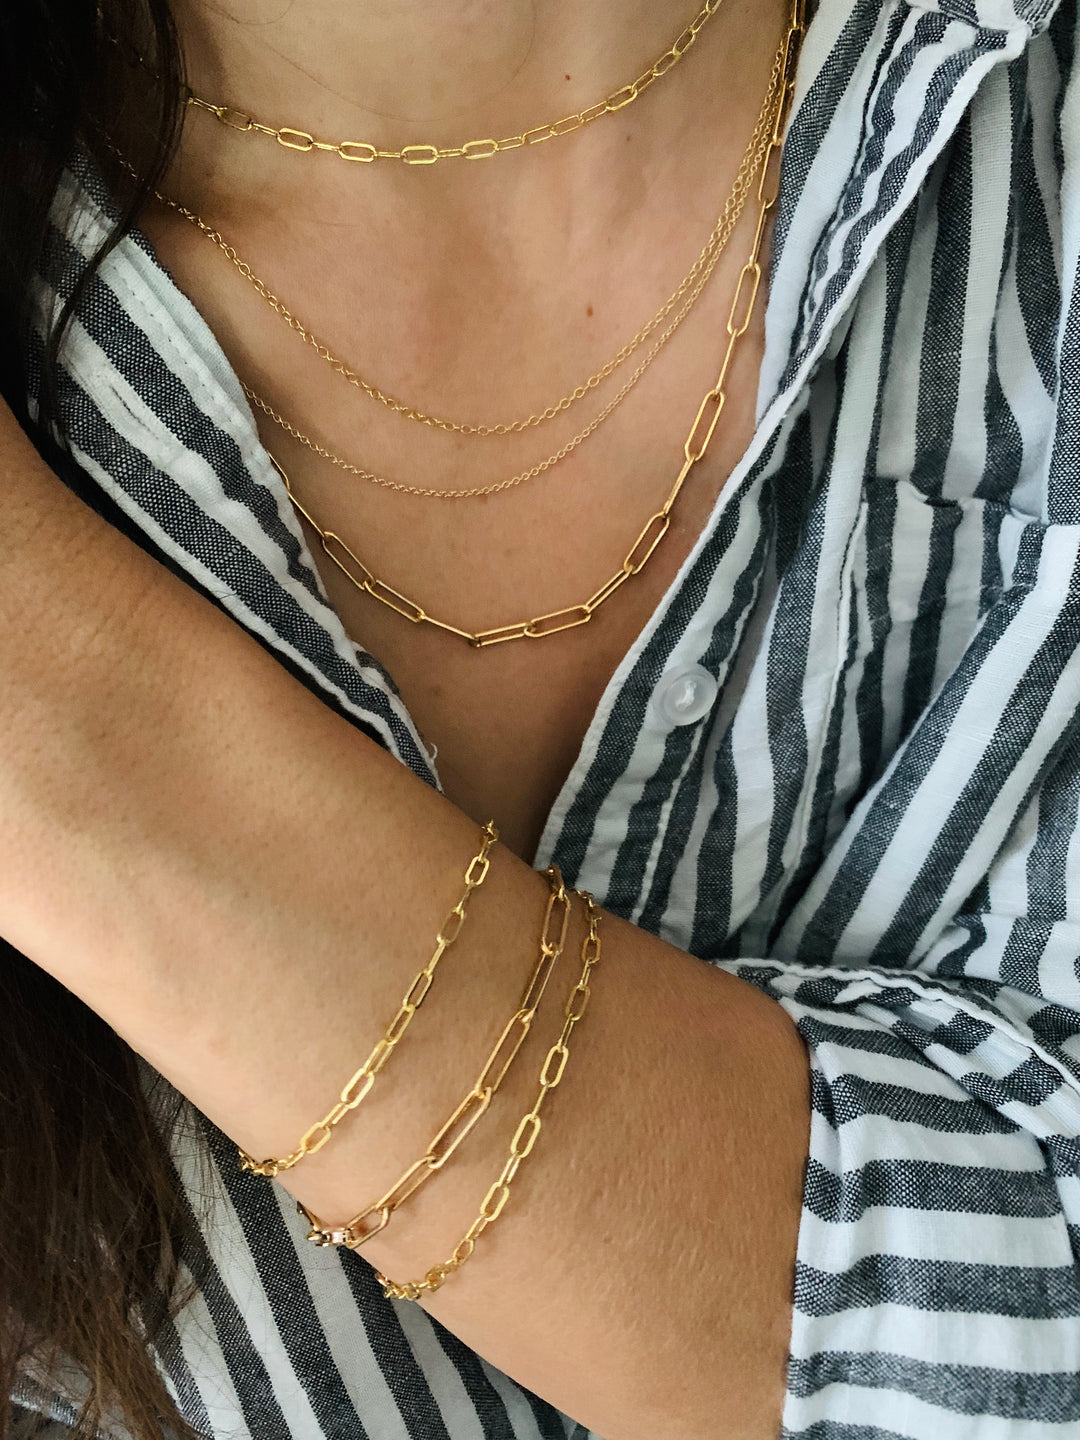 Gold-Filled Jewelry — What Is It Anyway?